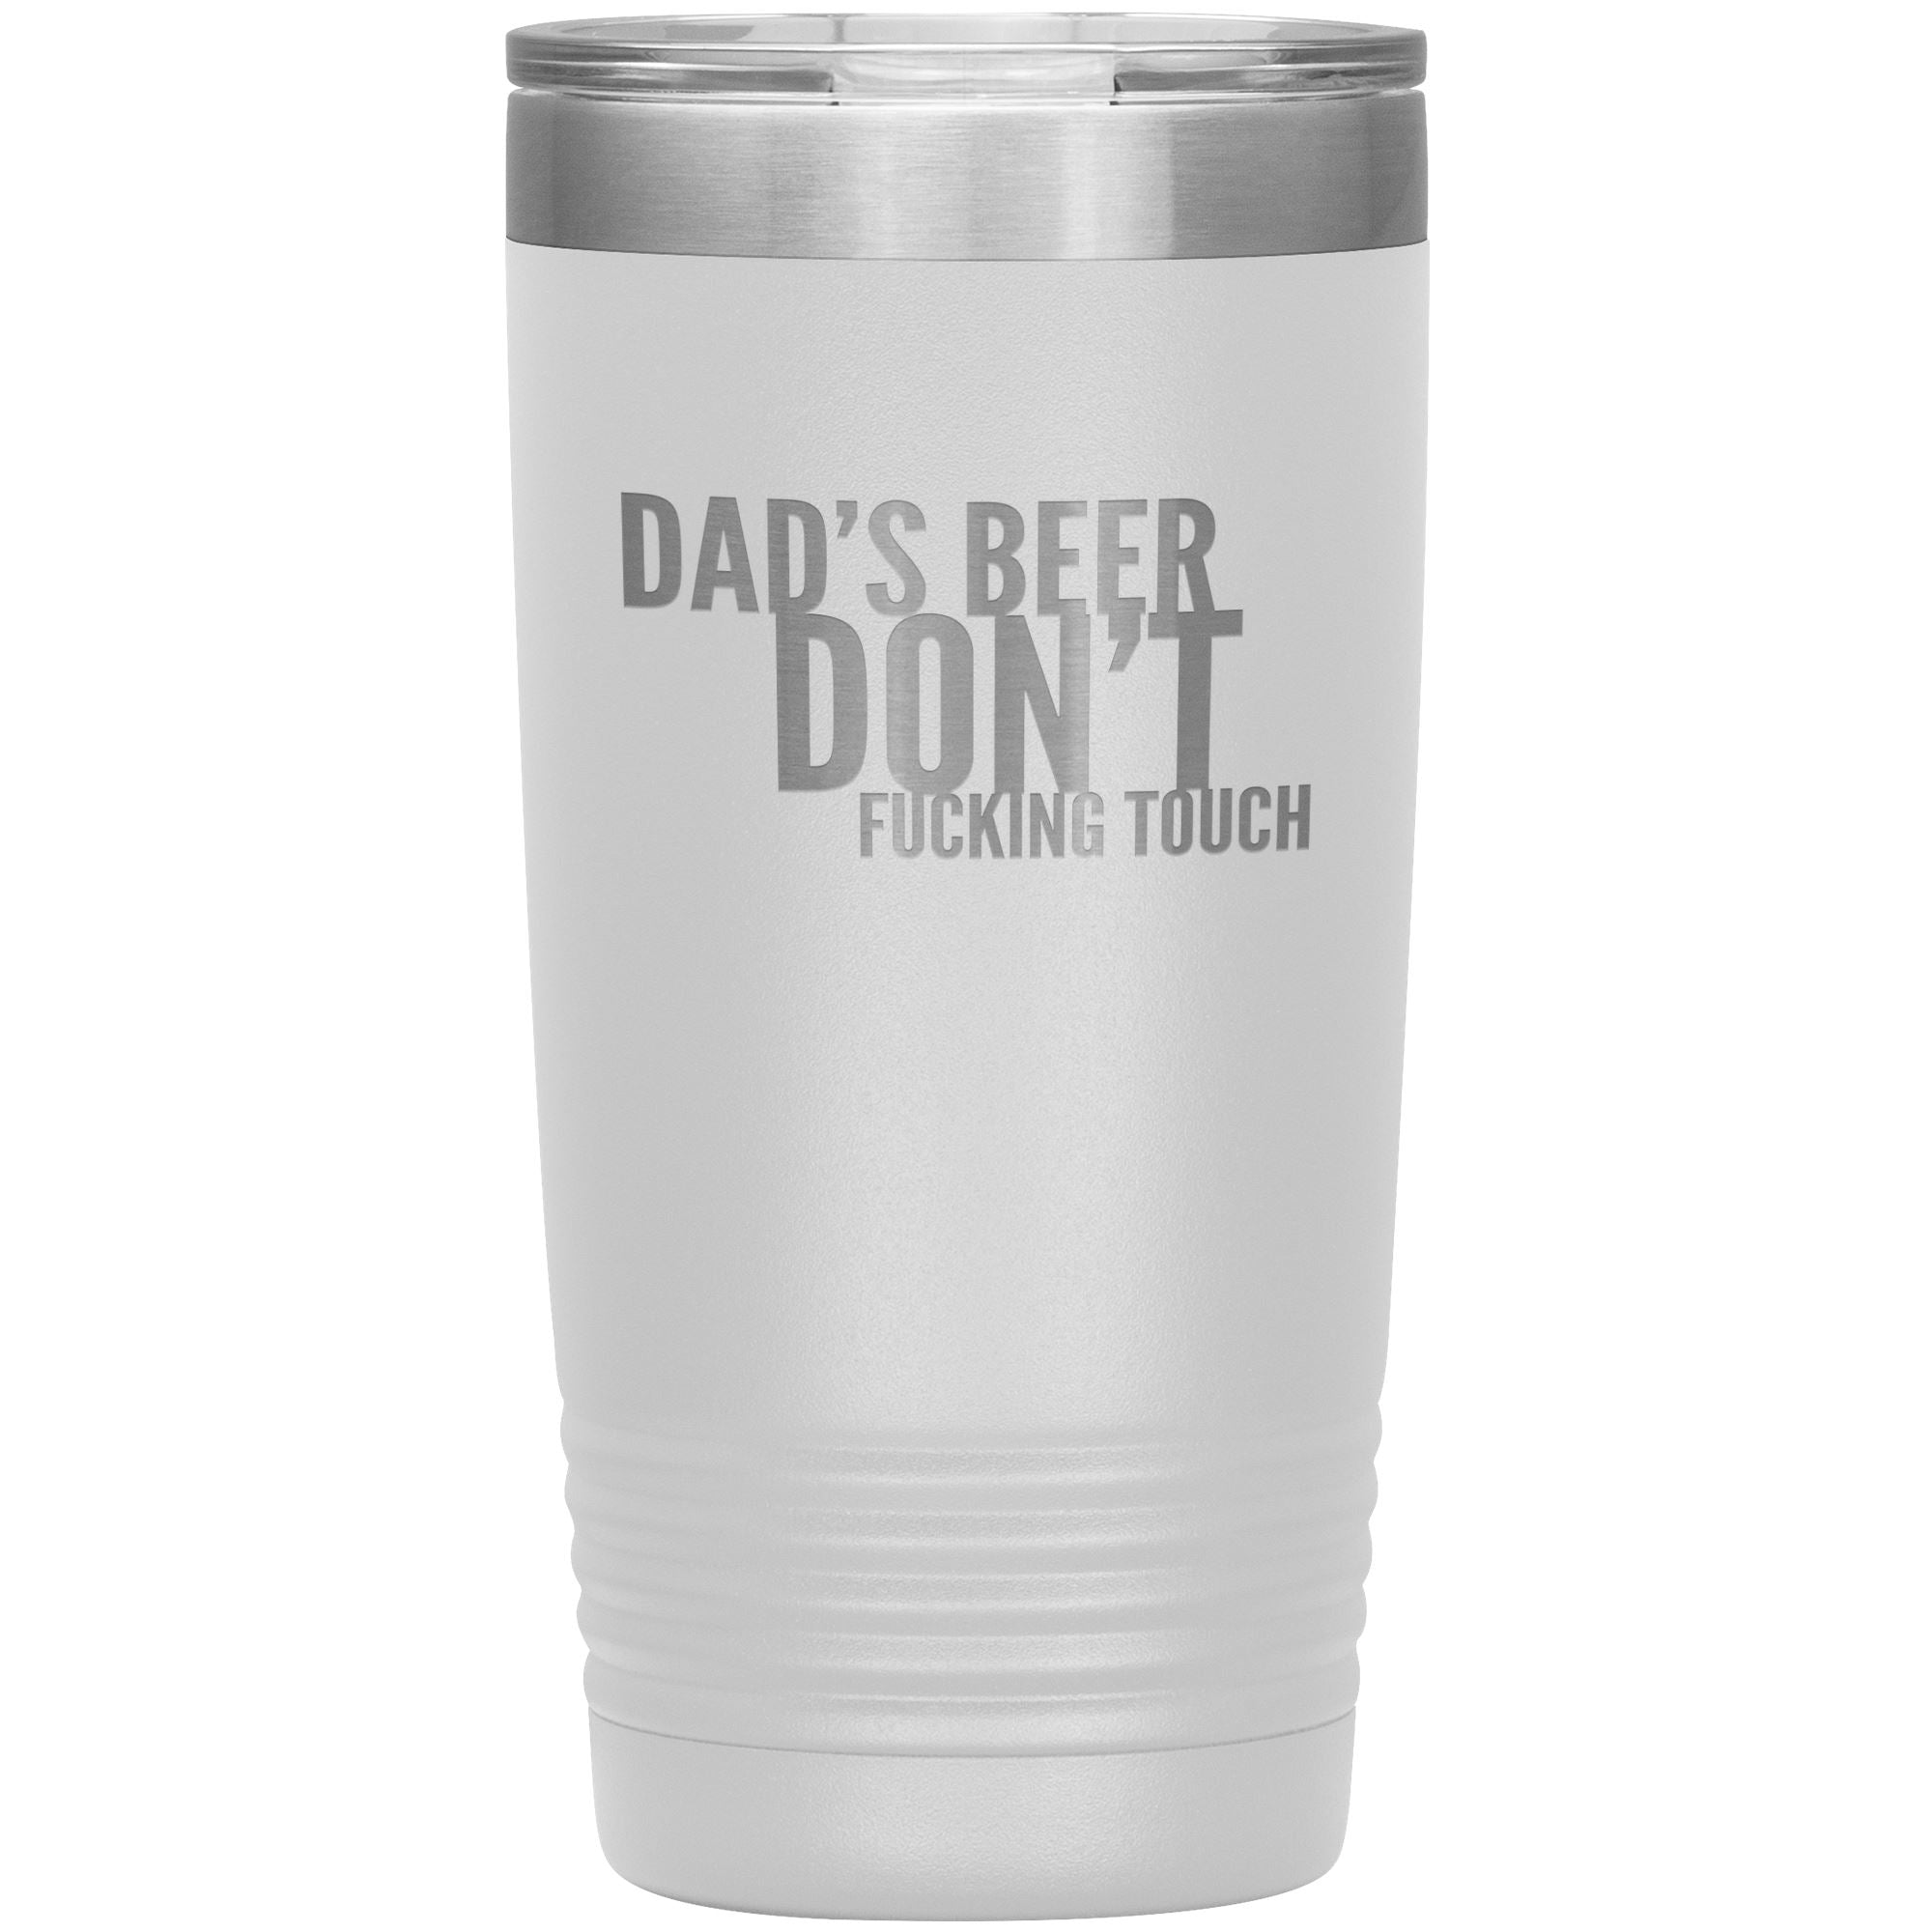 Dad's Beer Don't Fucking Touch 20oz Tumbler Tumblers White 